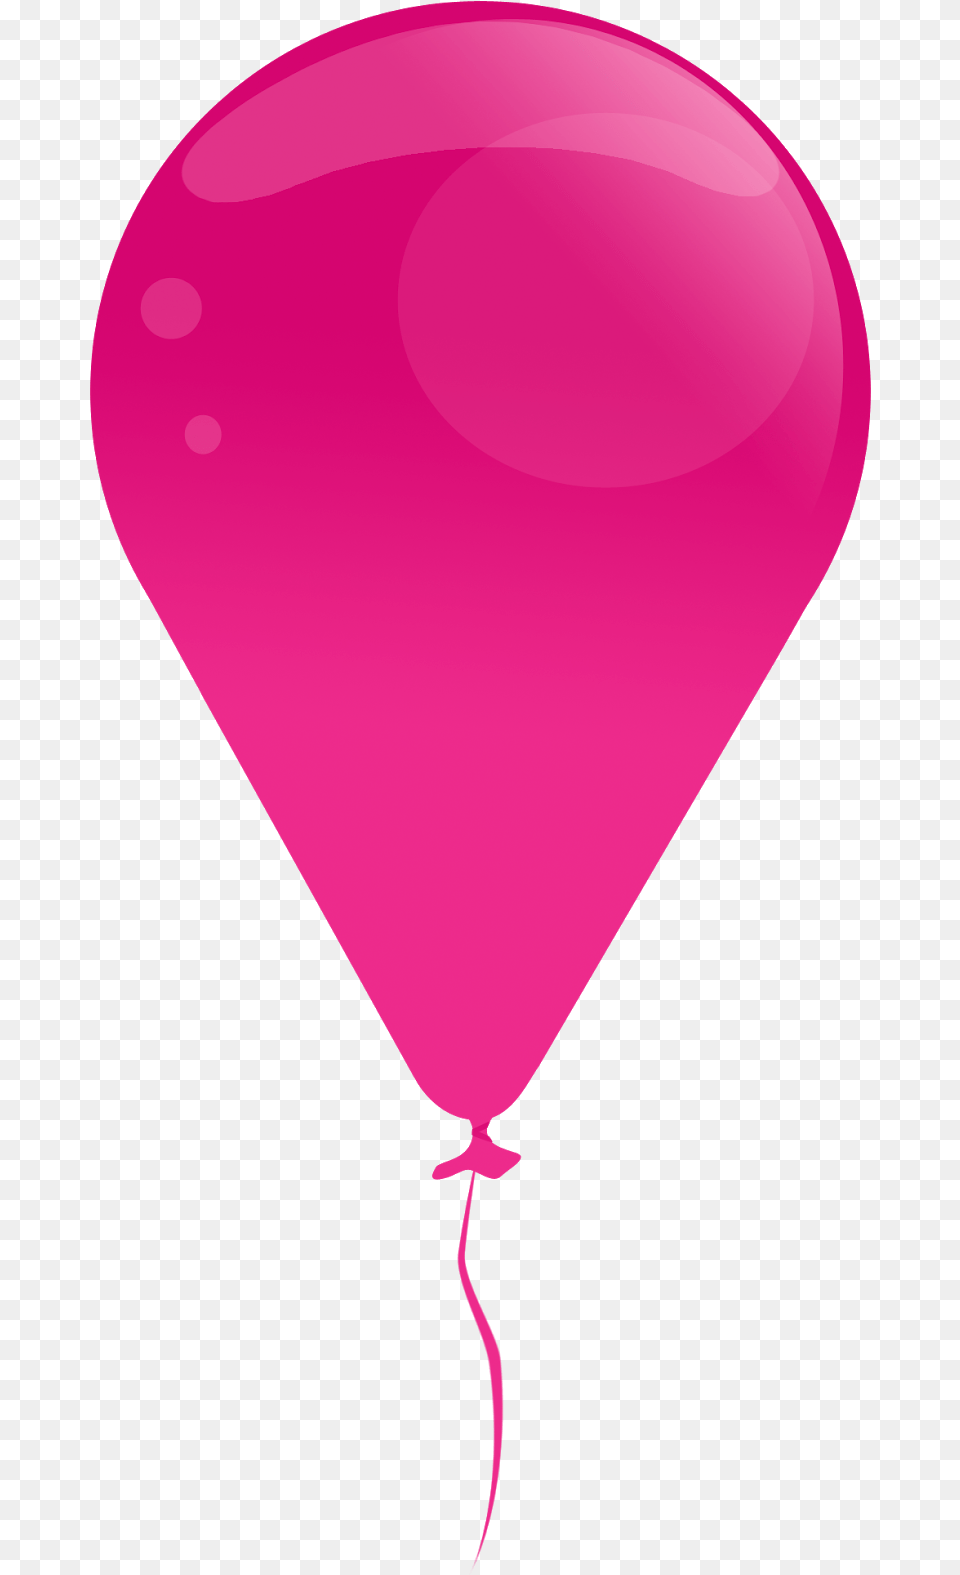 Balloon On Transparent Background Free Png